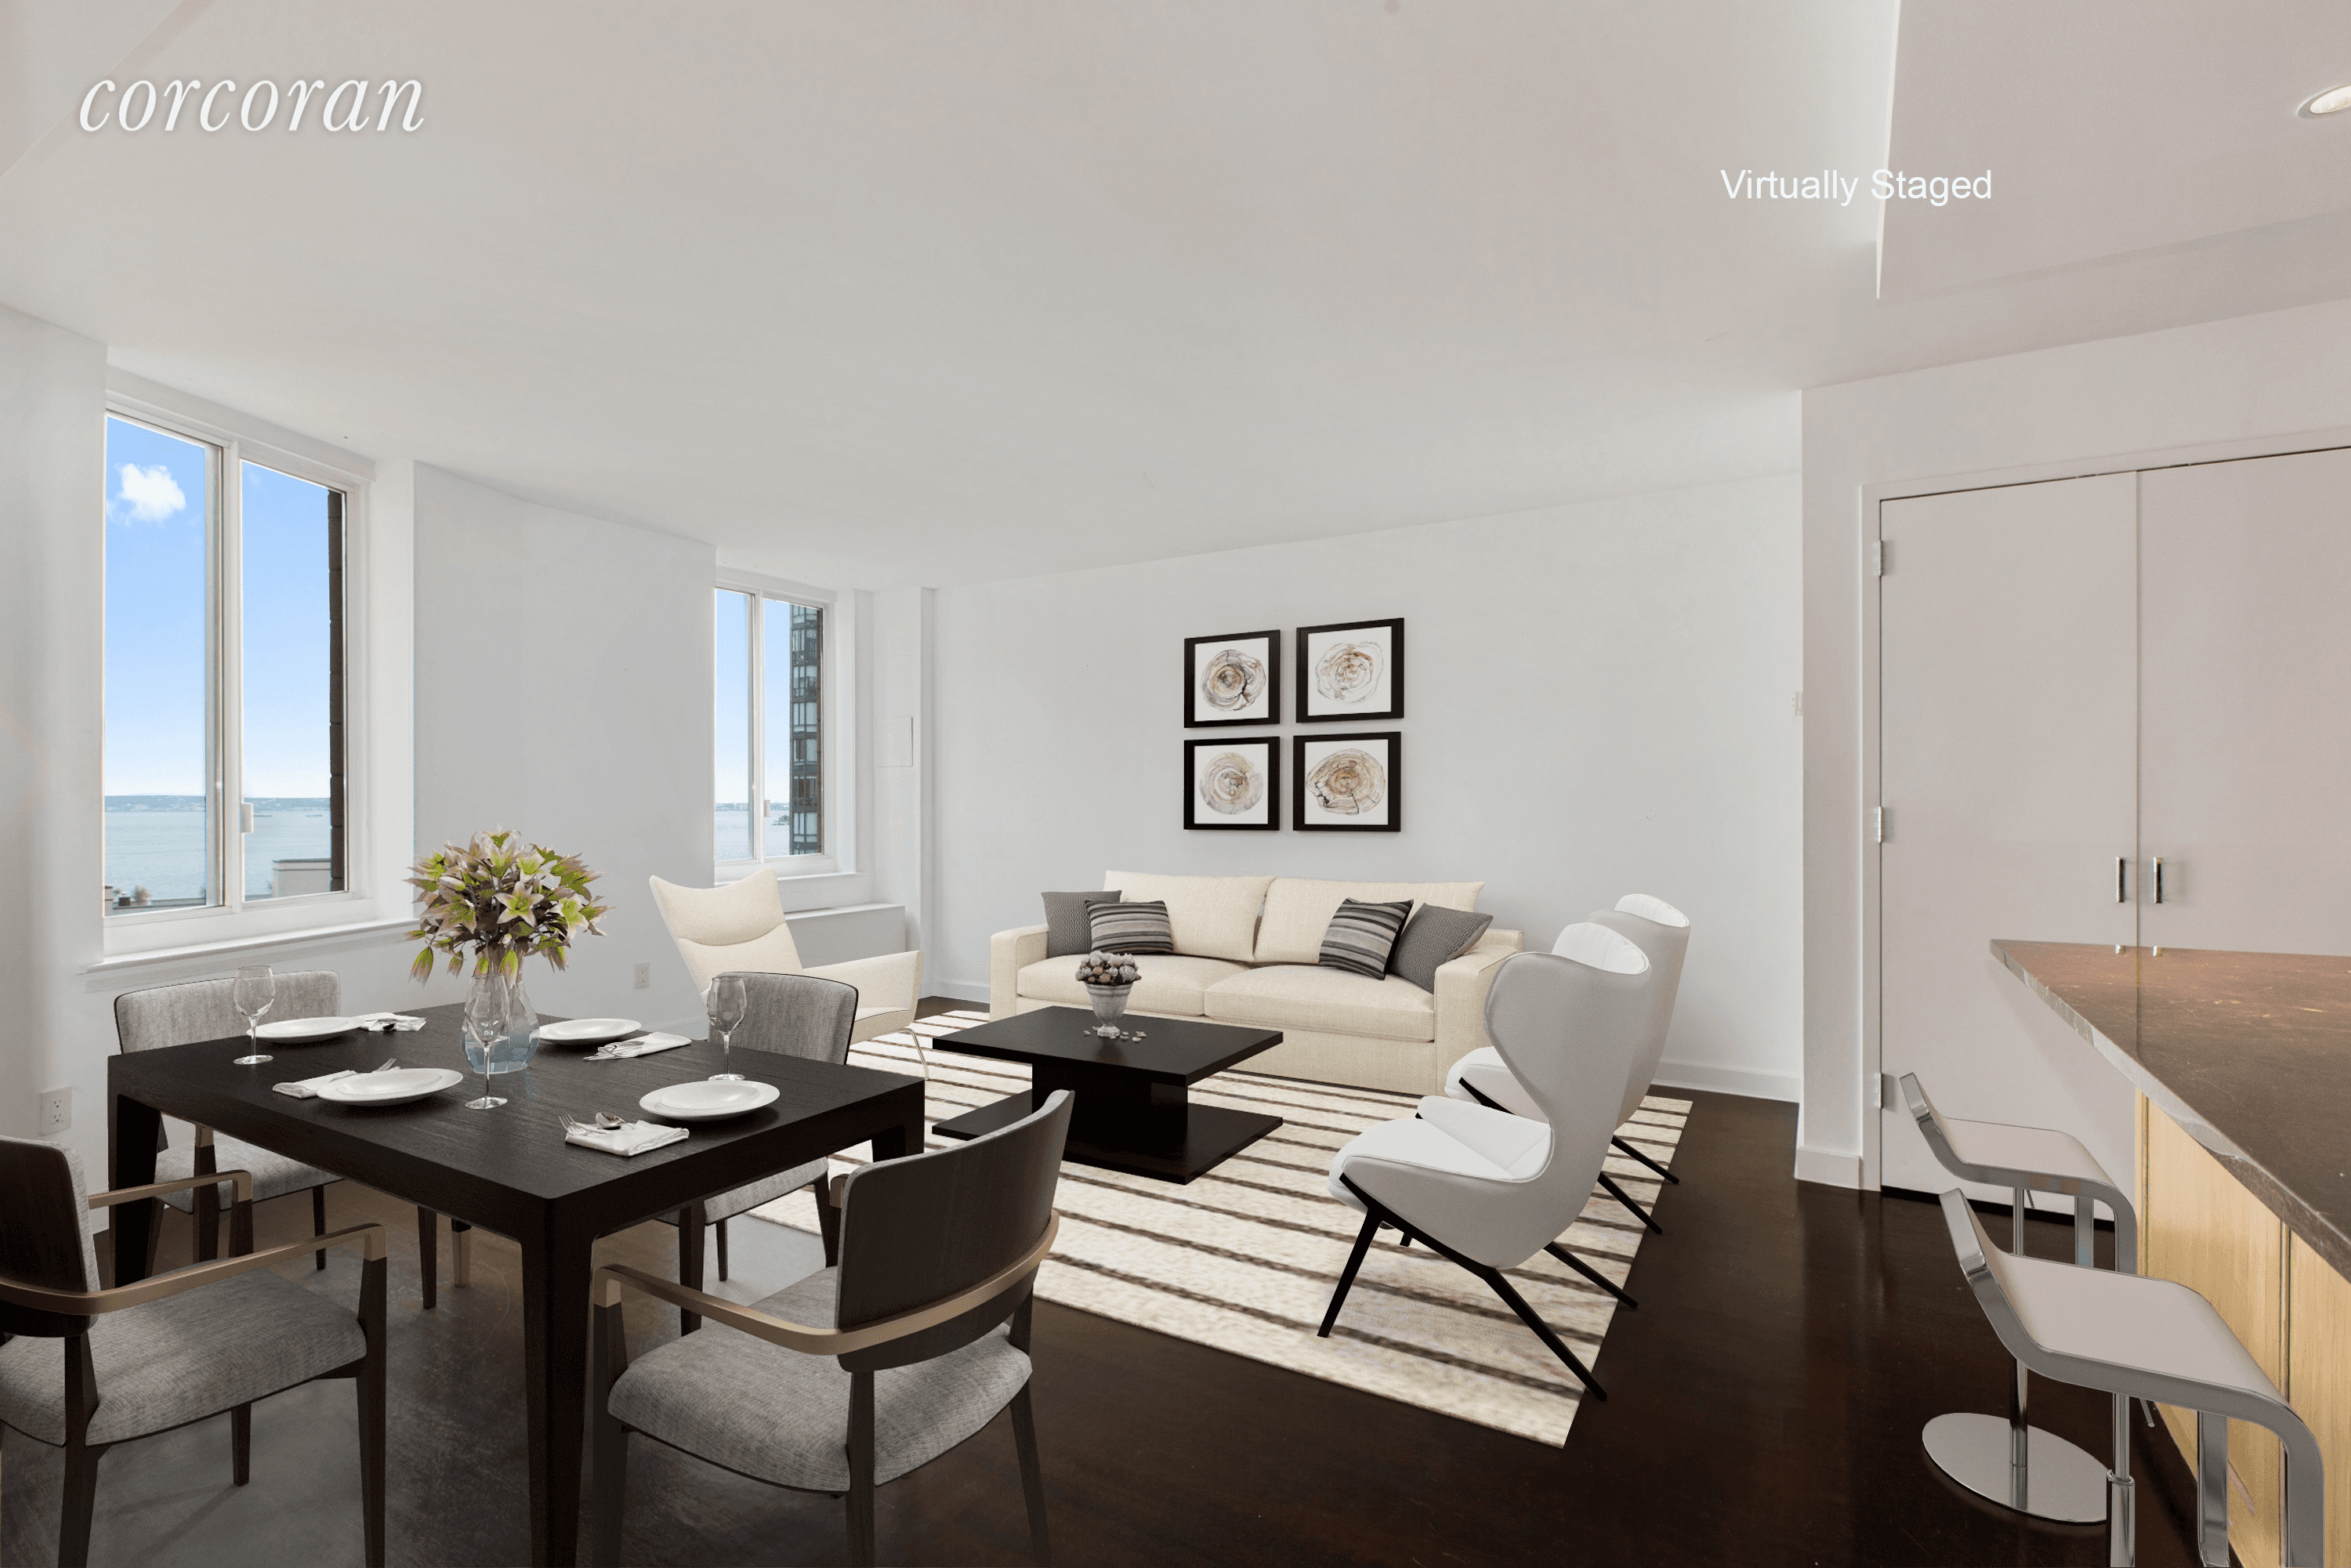 333 Rector Place, PHS2, Battery Park City 1 Rector Place This is a tremendous opportunity to lease an exquisitely designed one bedroom penthouse at 1 Rector Park.